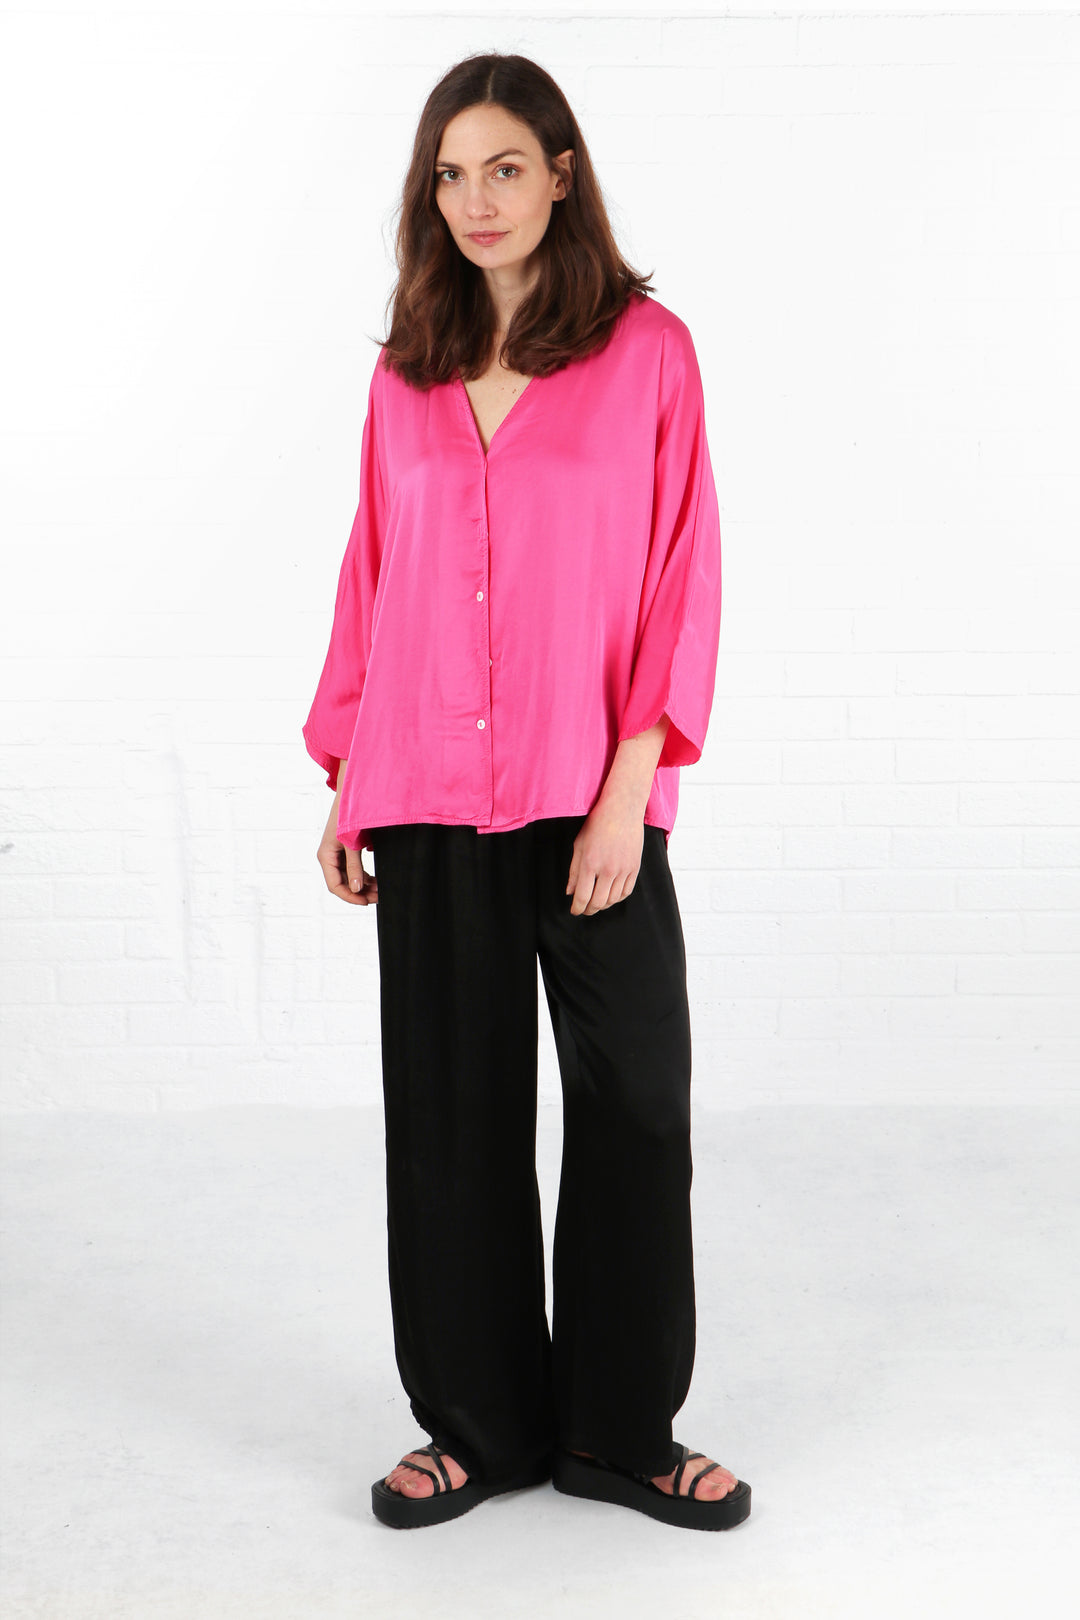 model wearing a silky textured 3/4 sleeve v neck pink blouse with a button down front